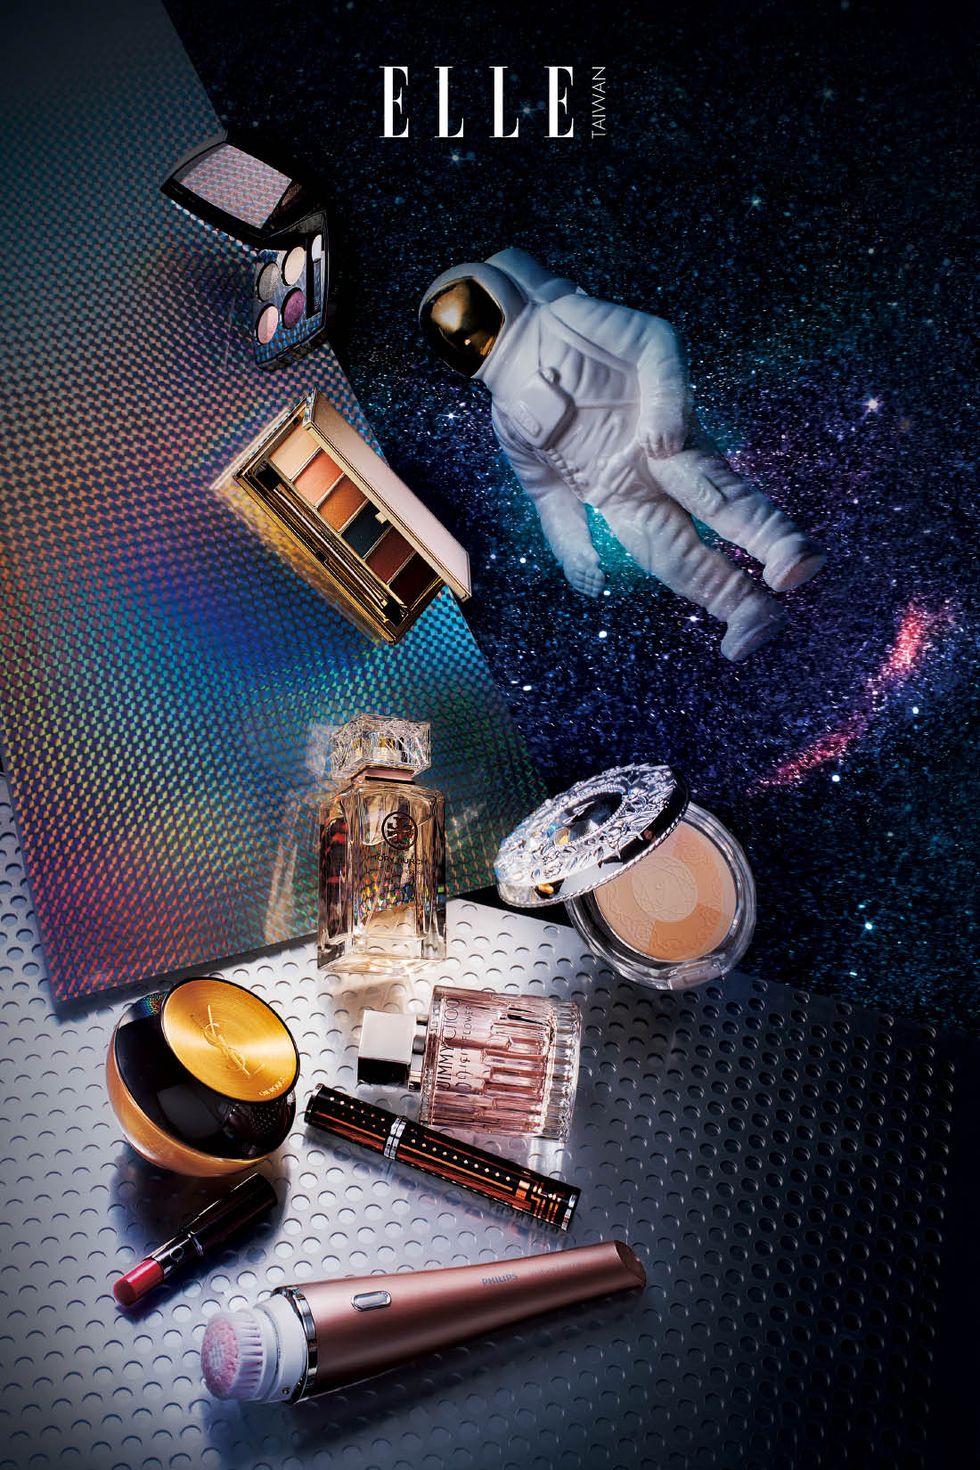 Technology, Space, Perfume, Still life photography, Cosmetics, Toy, Figurine, Spacecraft, Astronaut, 